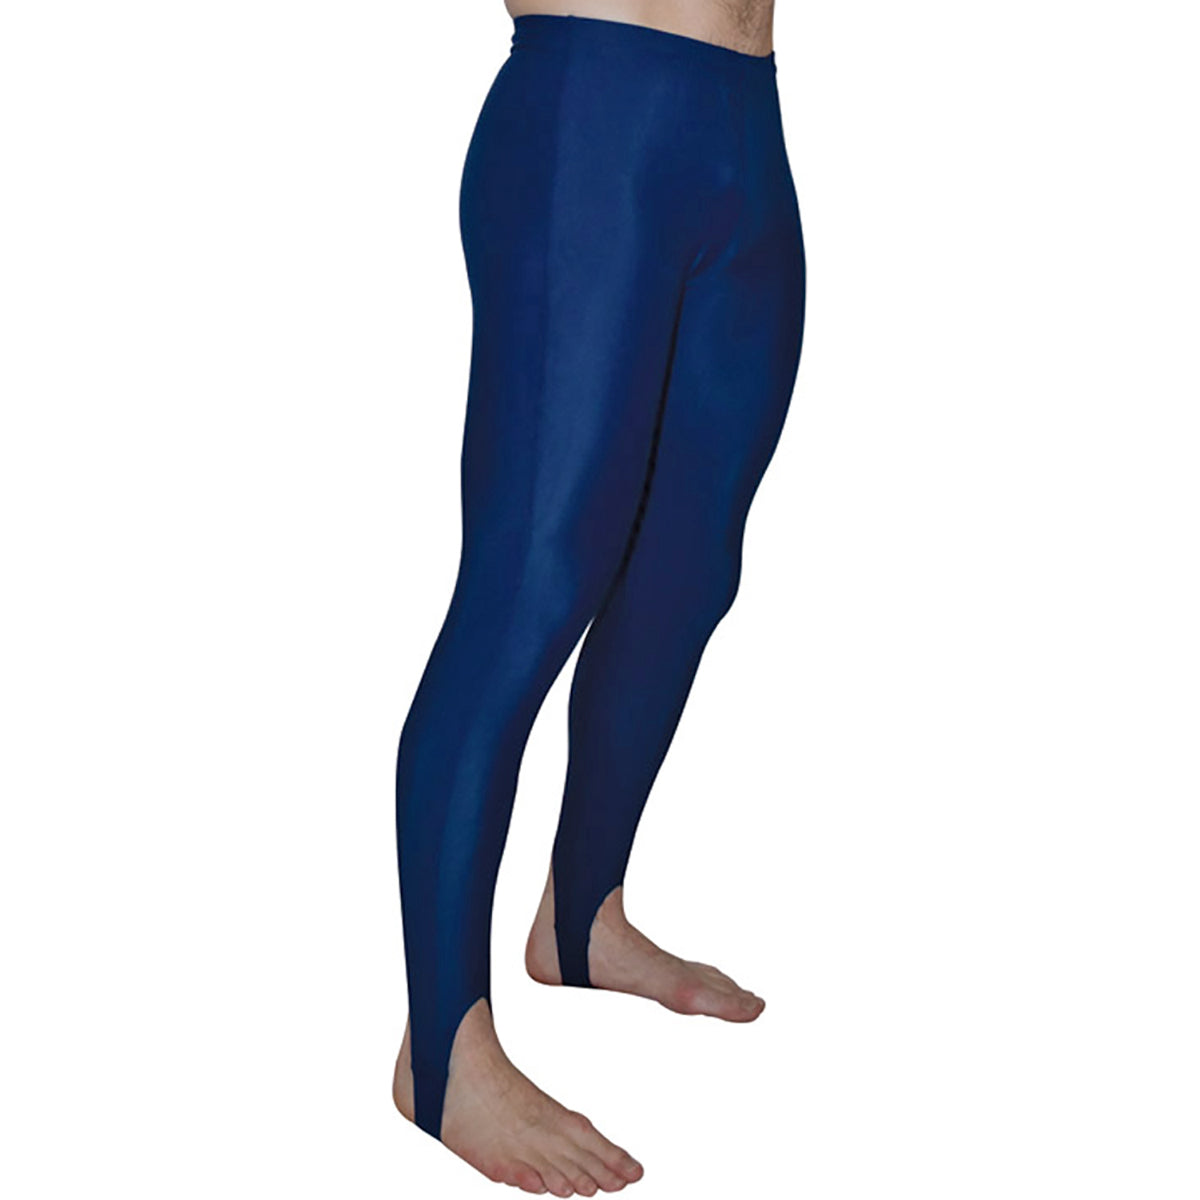 Cliff Keen The Force Compression Gear Wrestling Tights - Navy Cliff Keen